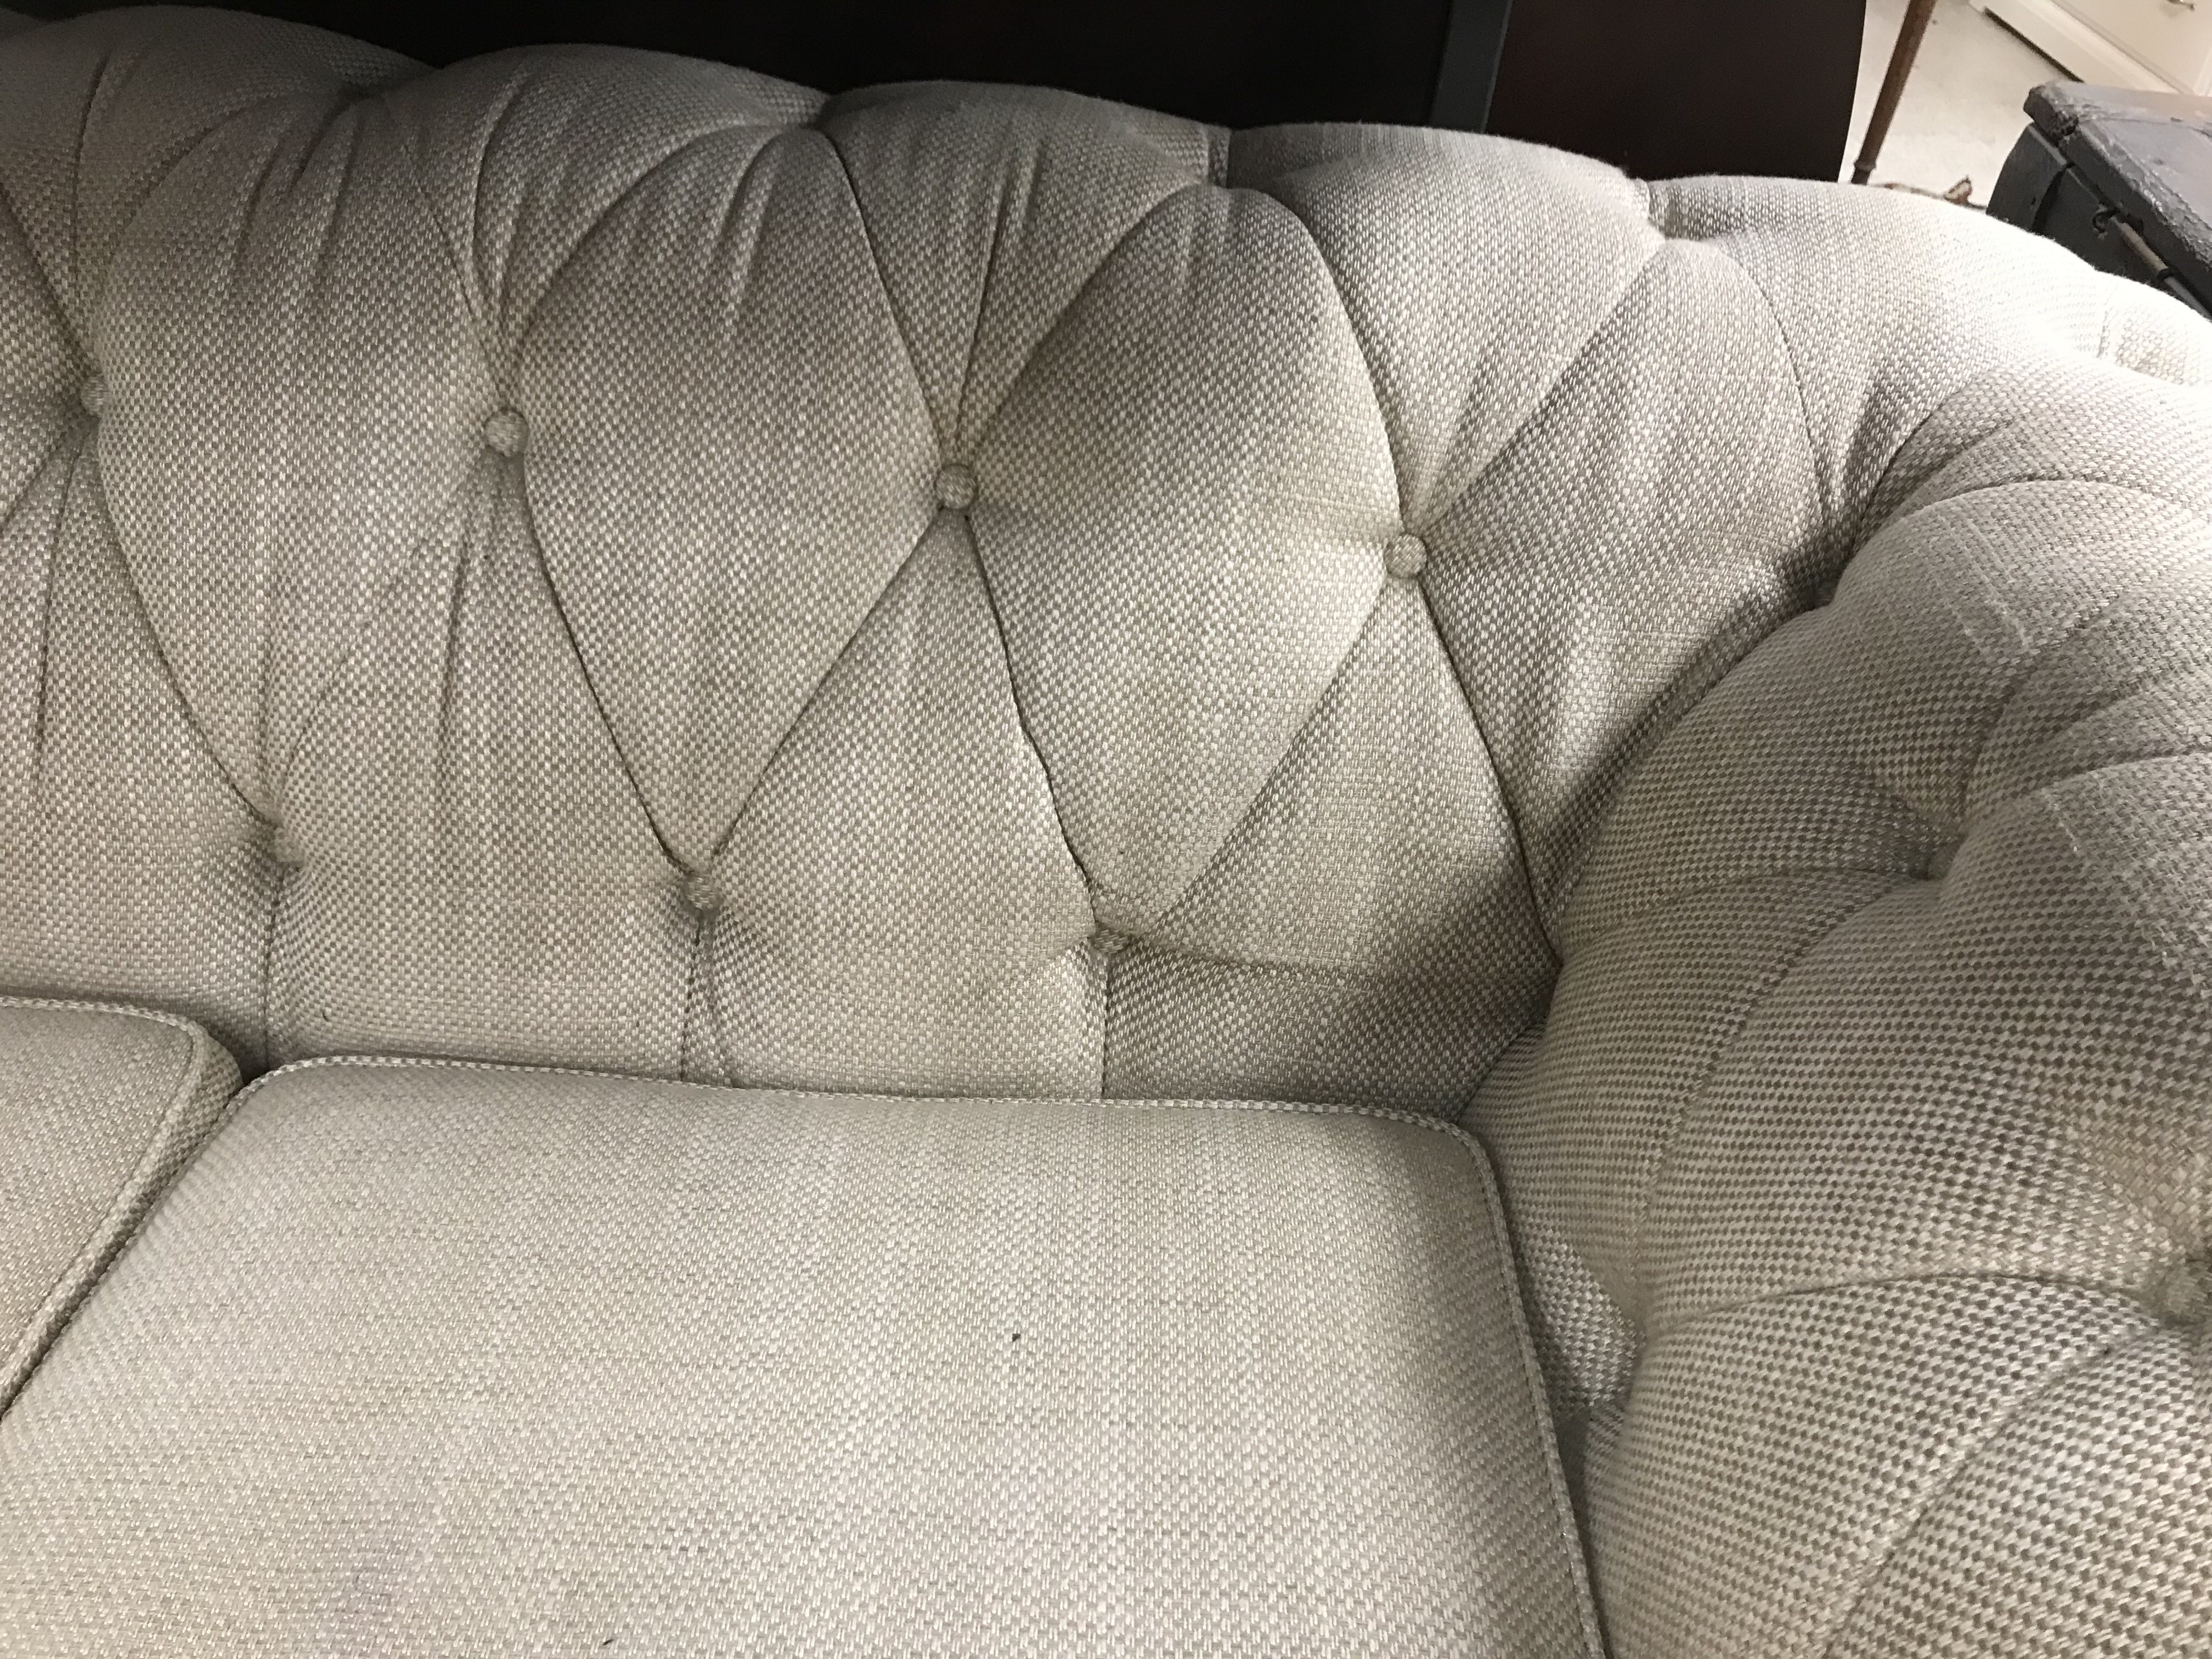 A Laura Ashley "Hudson" two seat sofa "Dalton Natural" buttoned upholstered, - Image 3 of 11